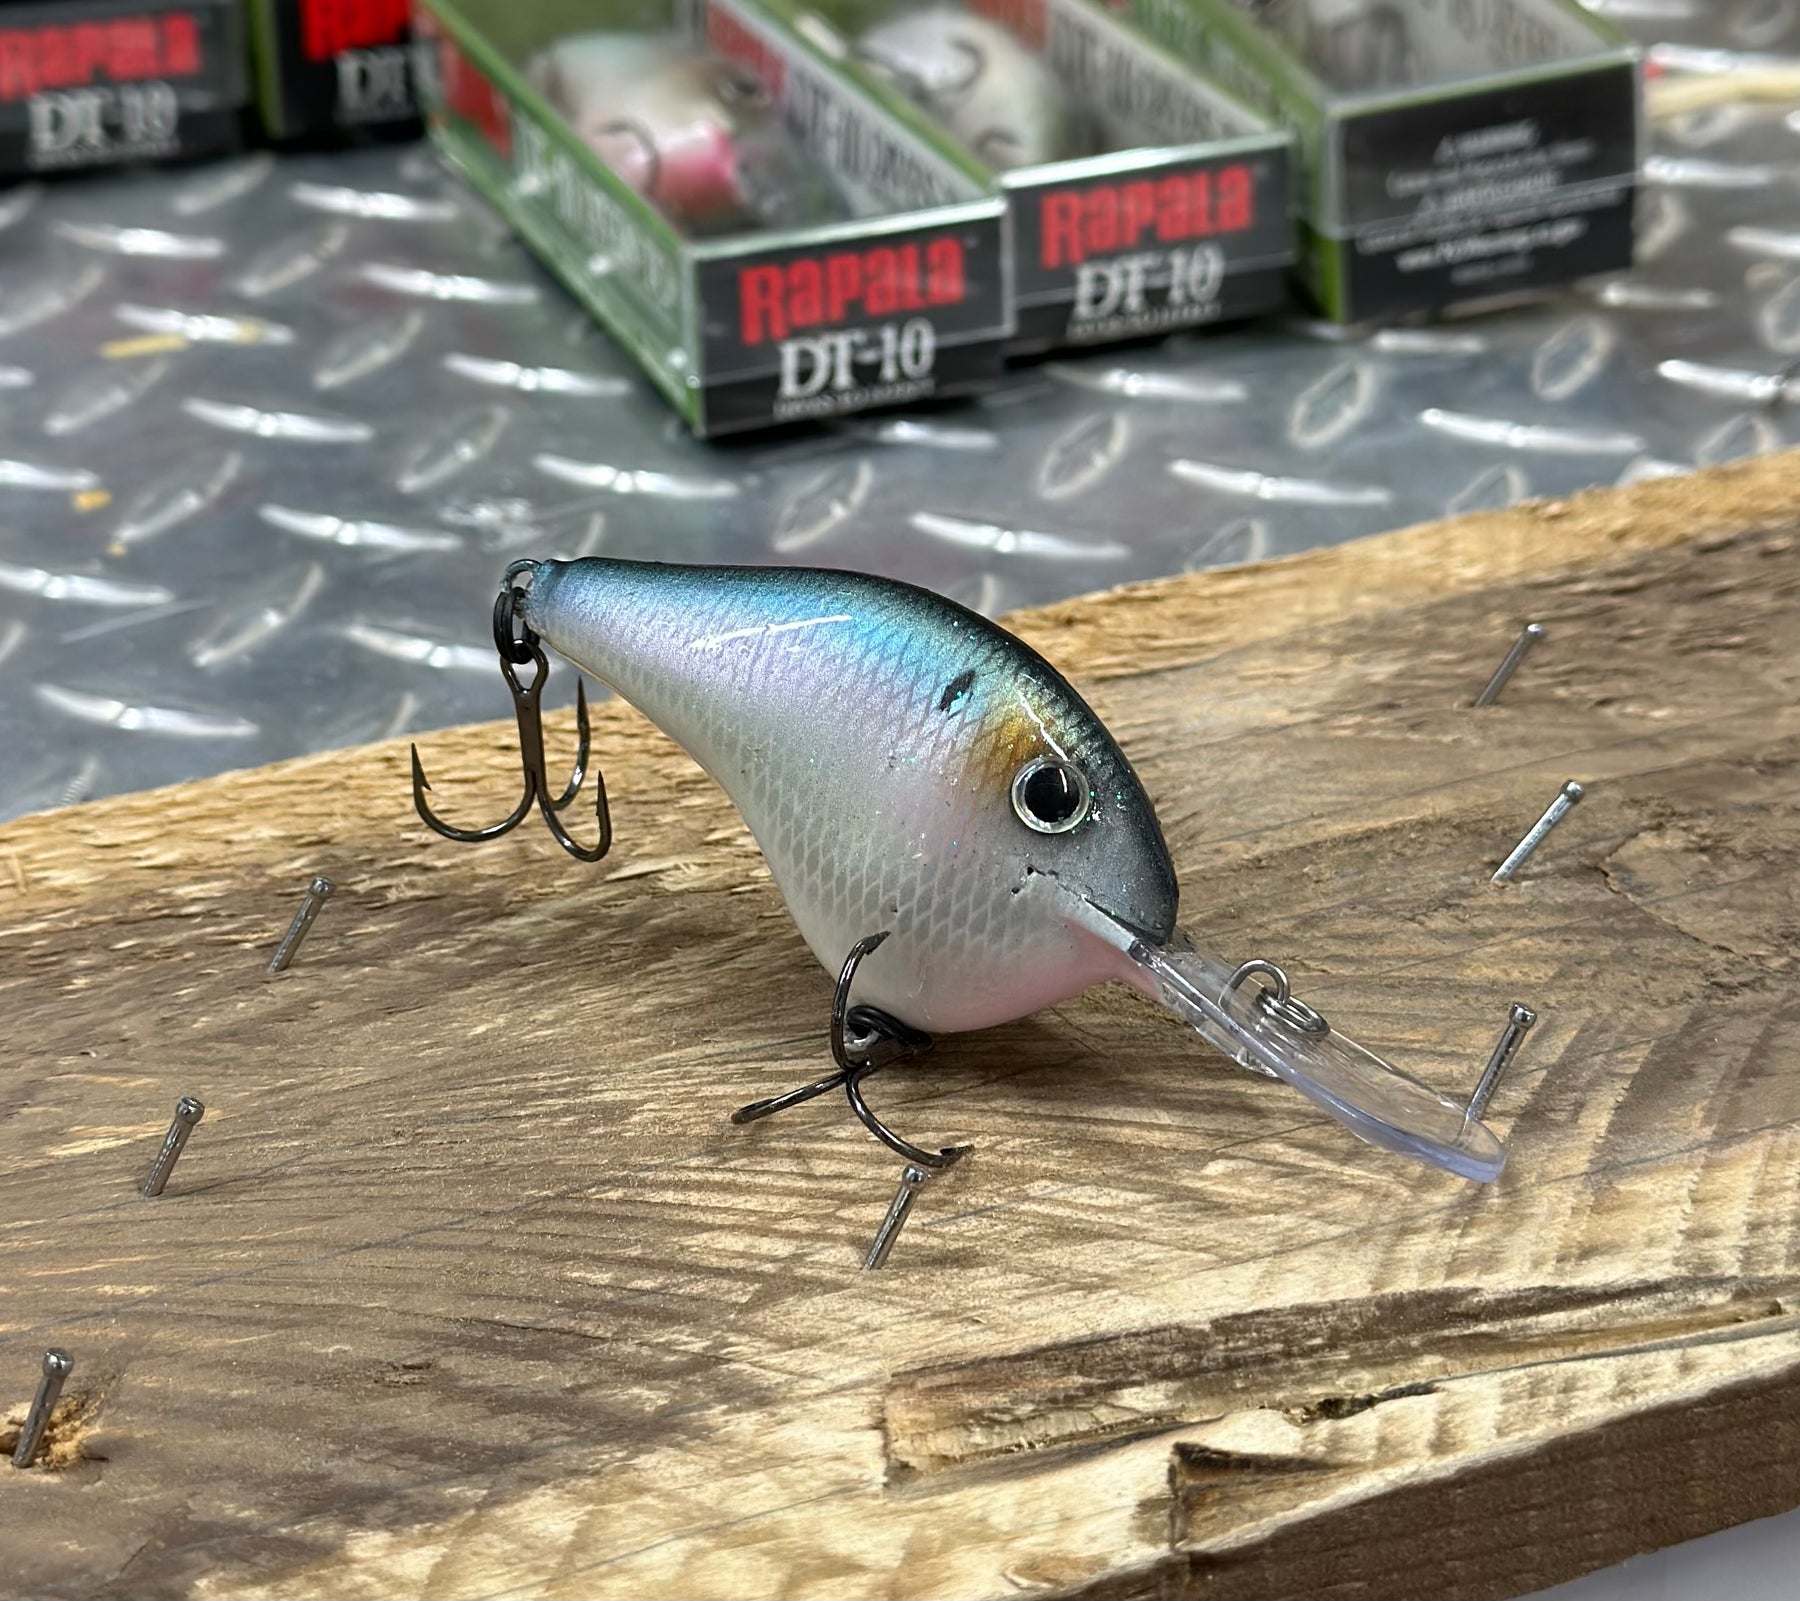 NEW ** RAPALA DT-10 'AMERICAN GIZZARD